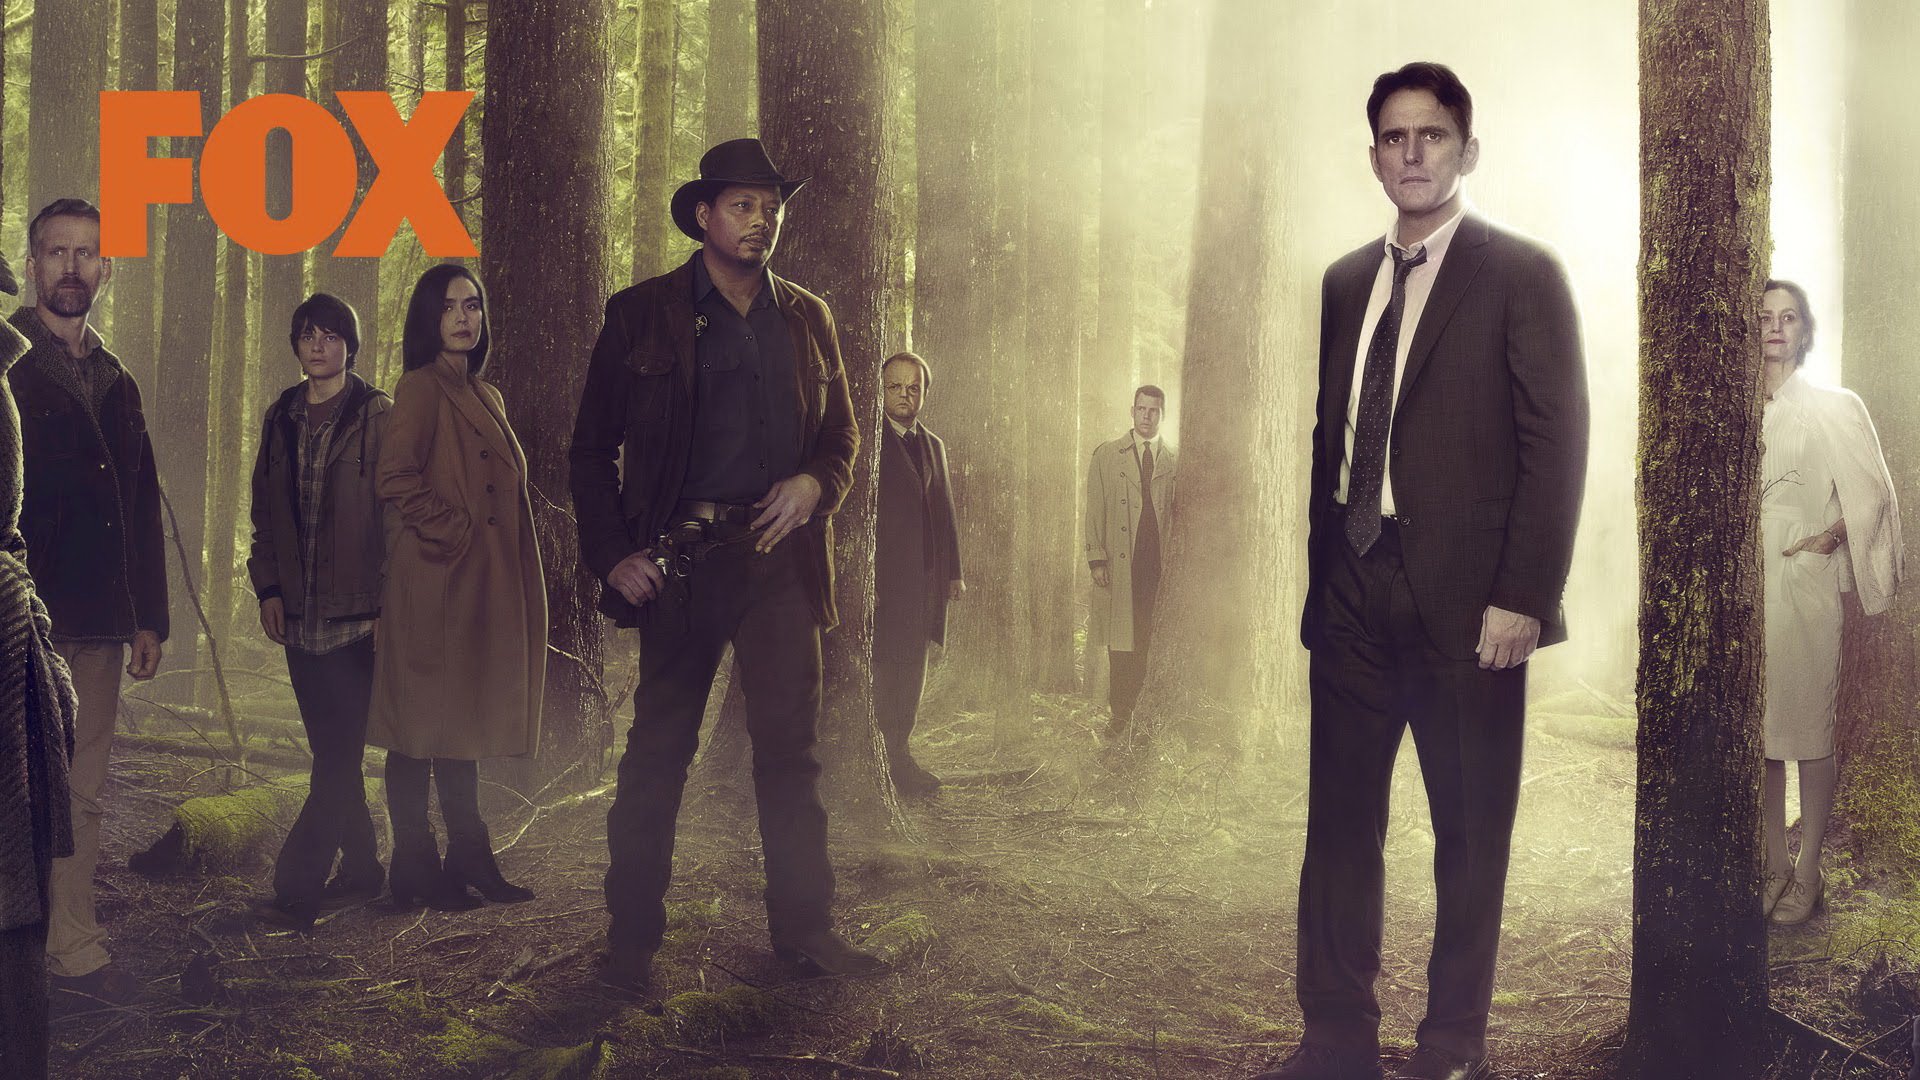 wayward, Pines, Fox, Series, Drama, Mystery, 1wpines, Crime, Thriller, Poster Wallpaper HD / Desktop and Mobile Background